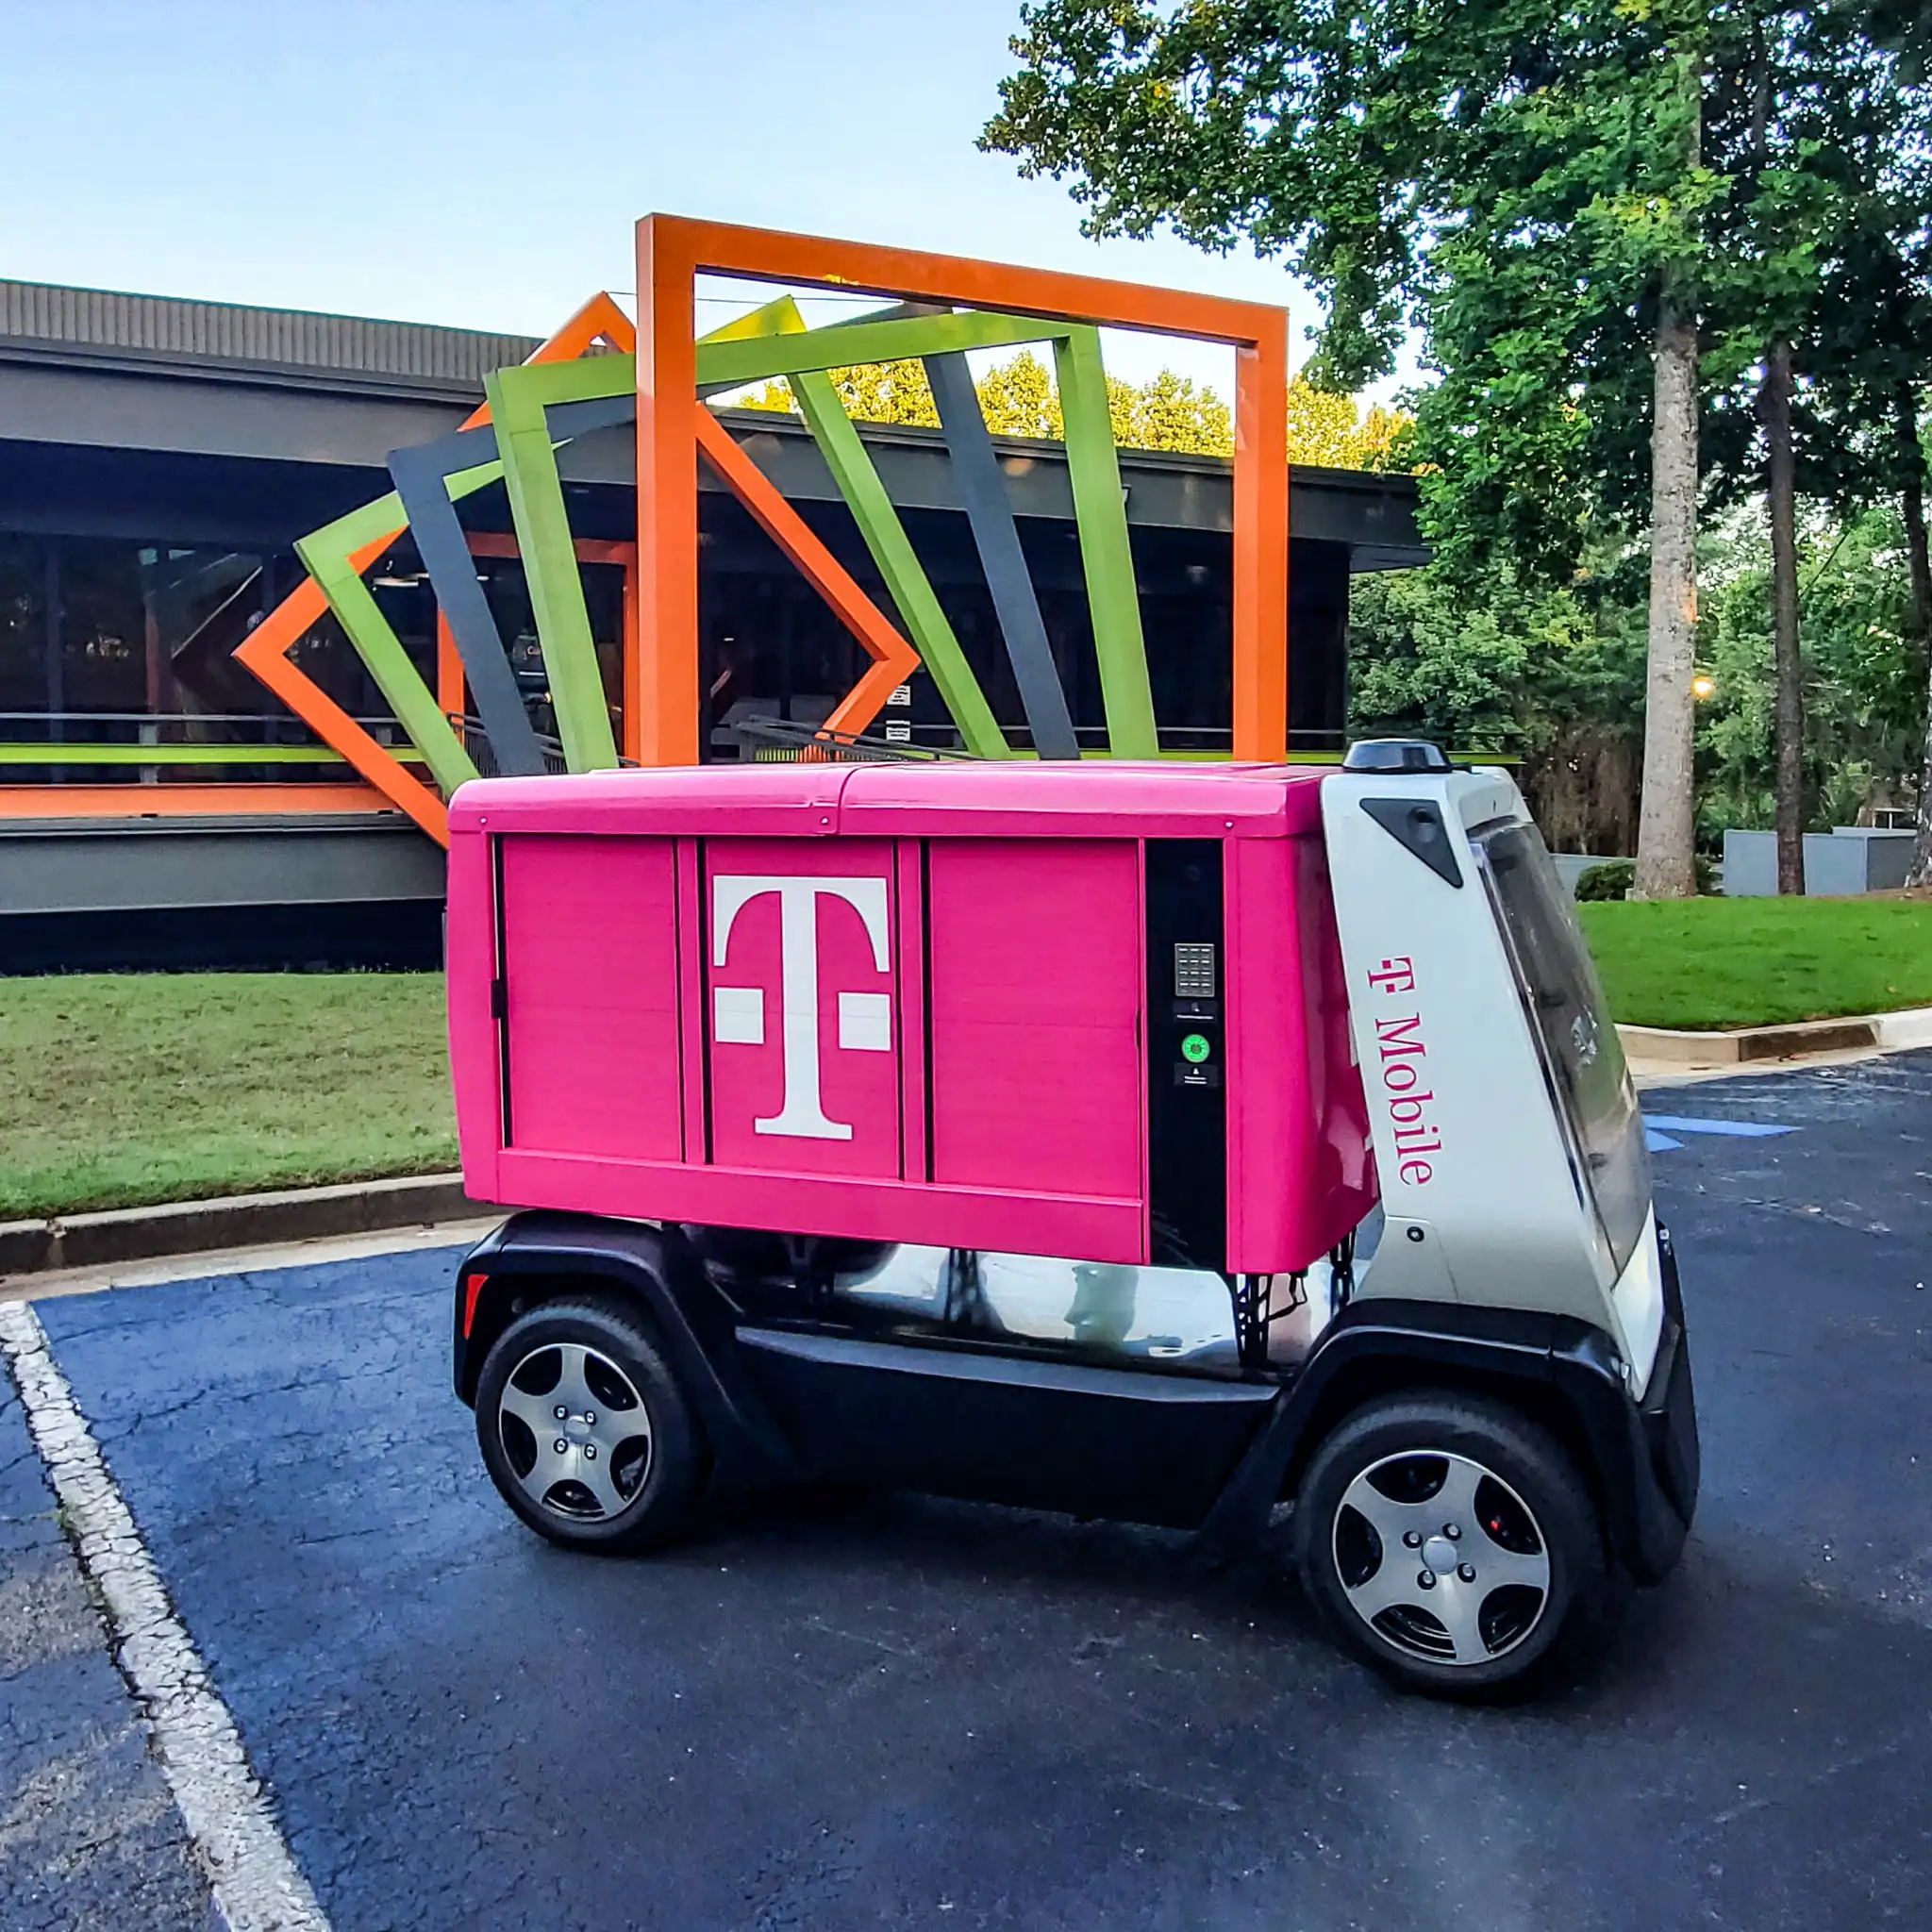 Clevon ARC at Peachtree Tmobile office